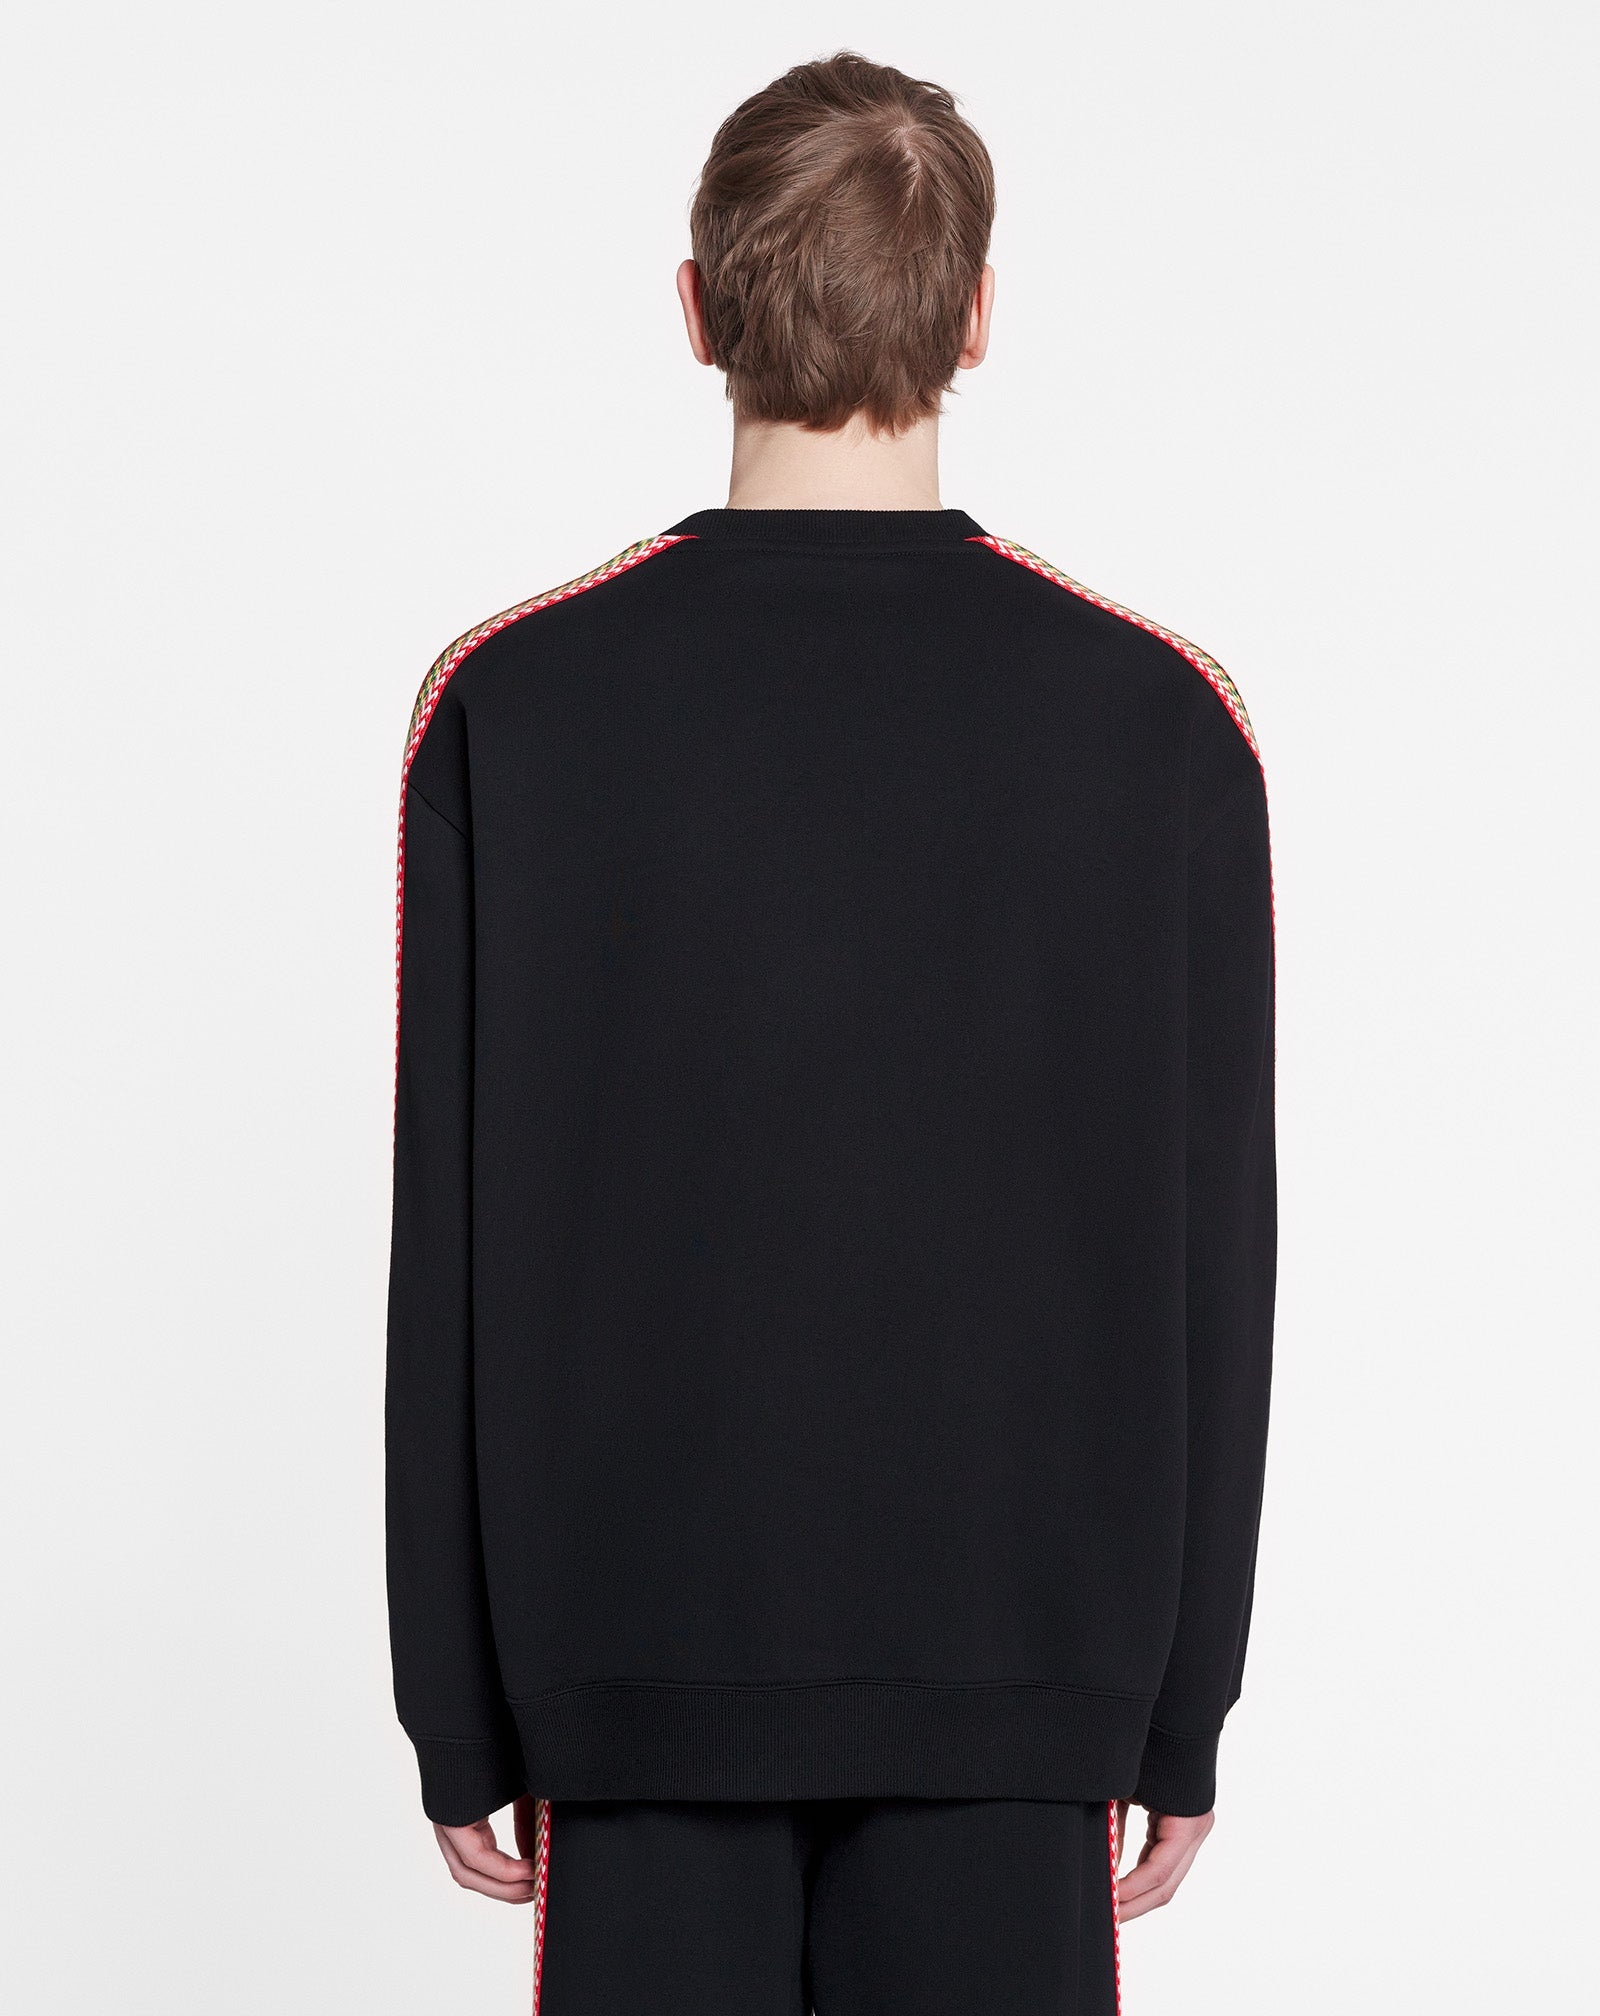 OVERSIZED LANVIN EMBROIDERED SIDE CURB SWEATSHIRT - 4